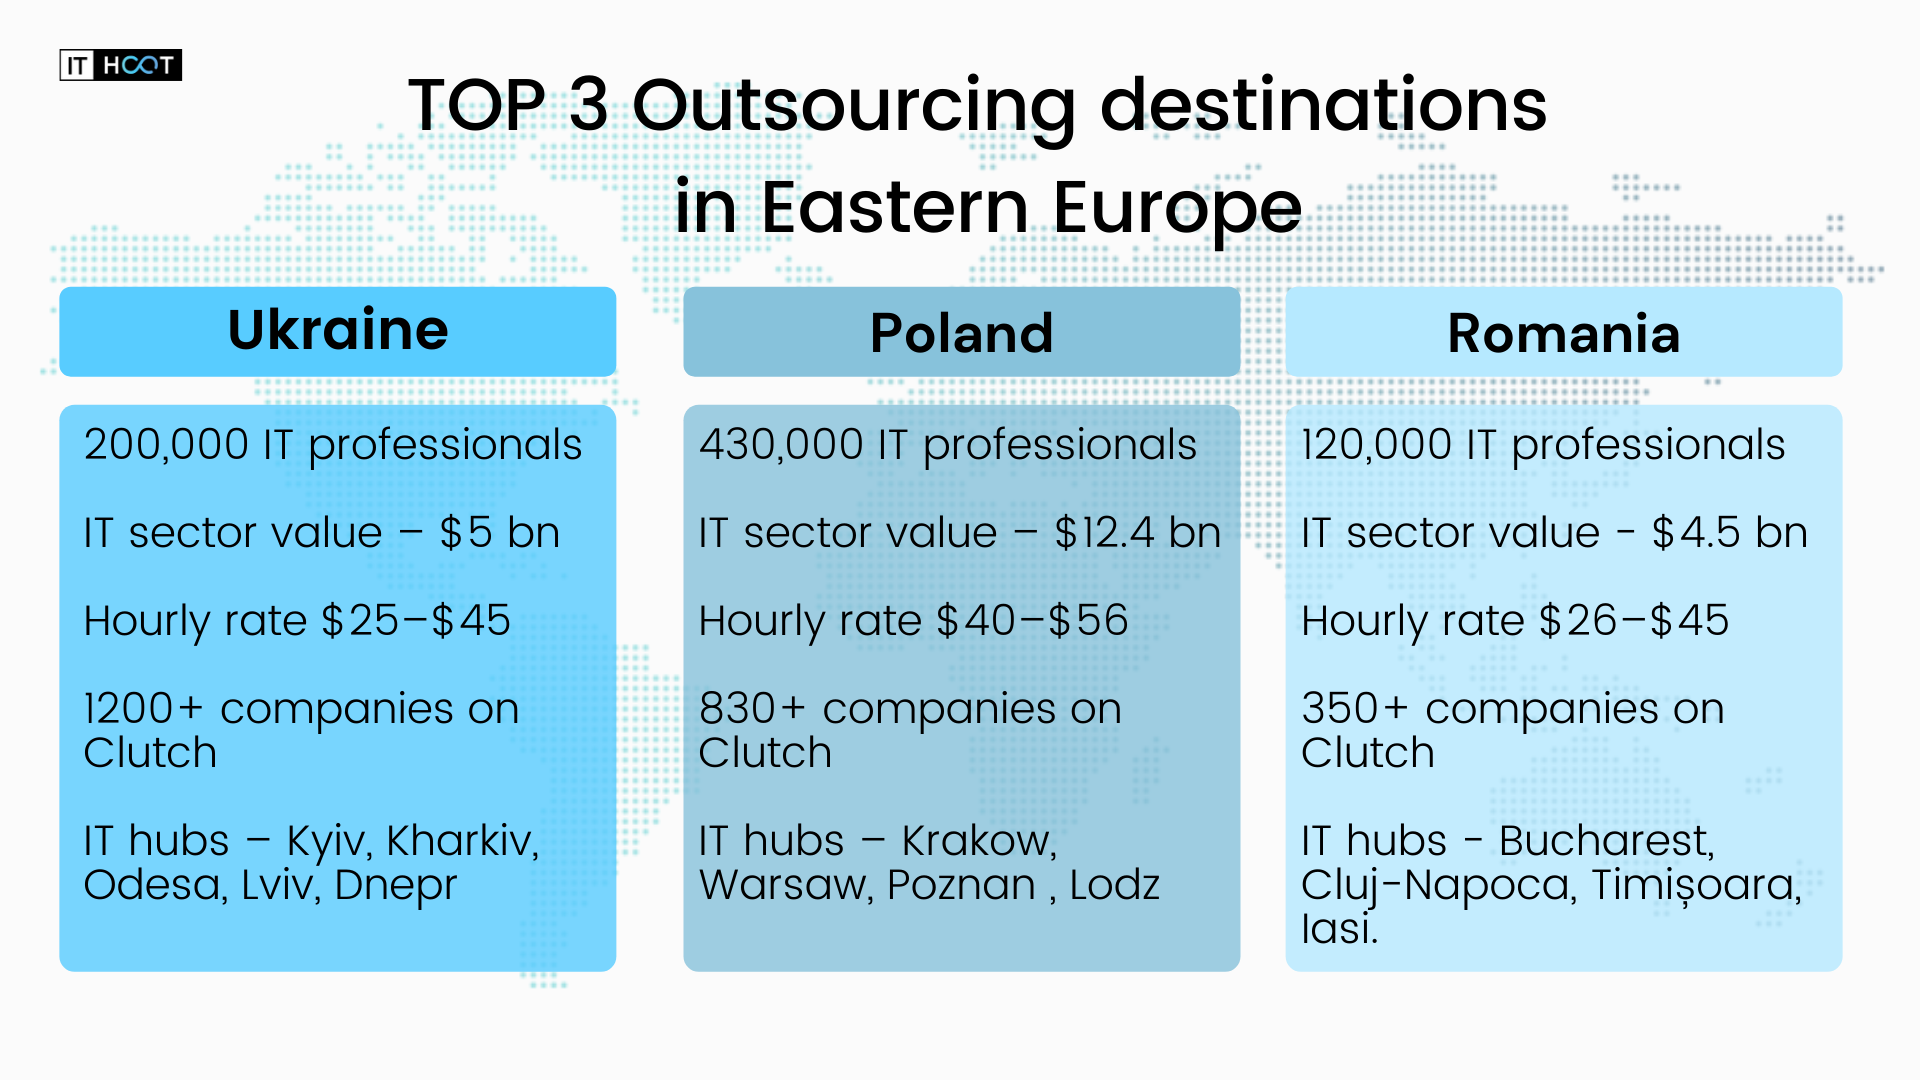 Top countries for IT outsourcing in Eastern Europe